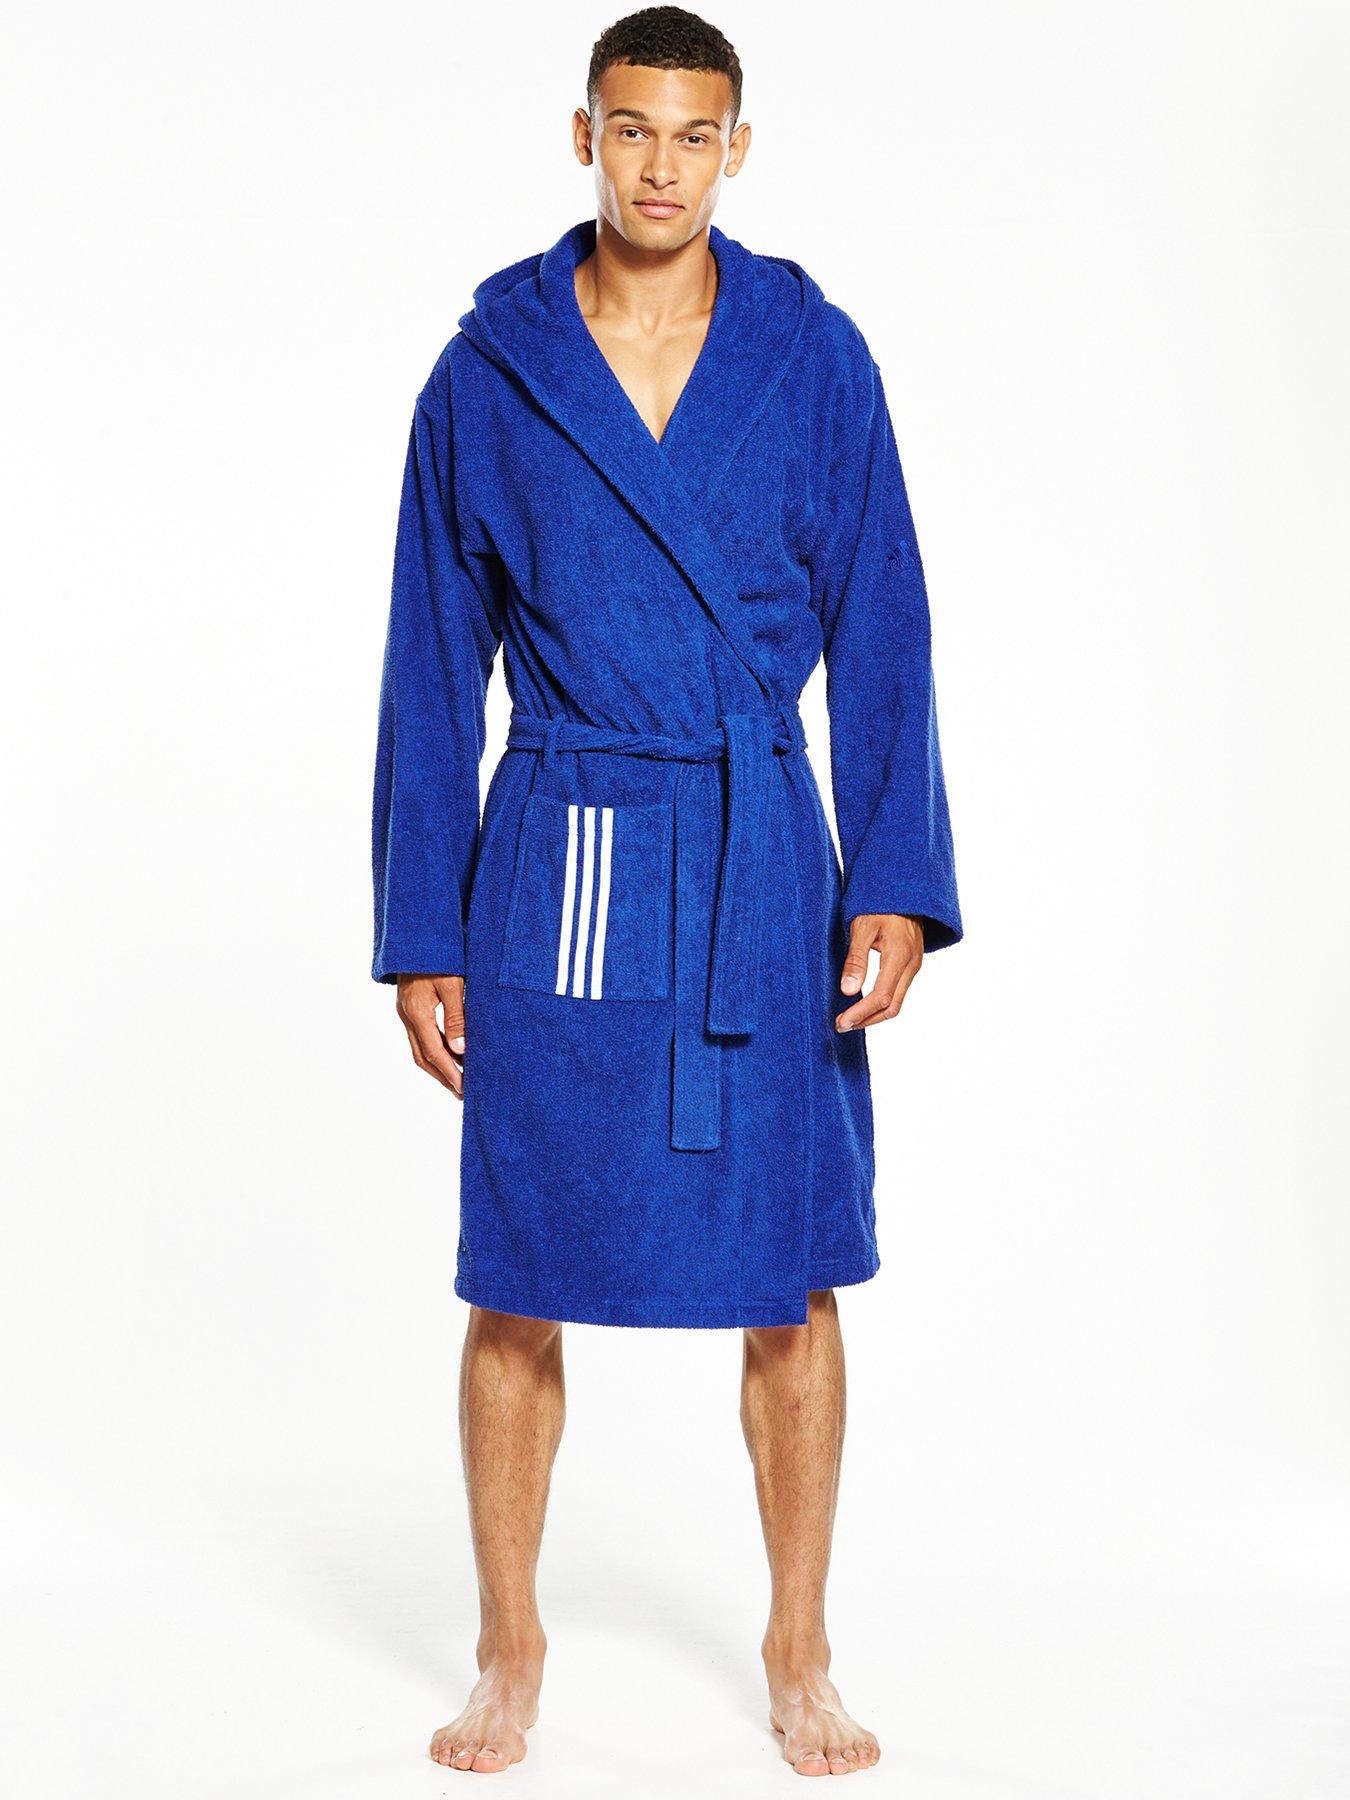 adidas dressing gown